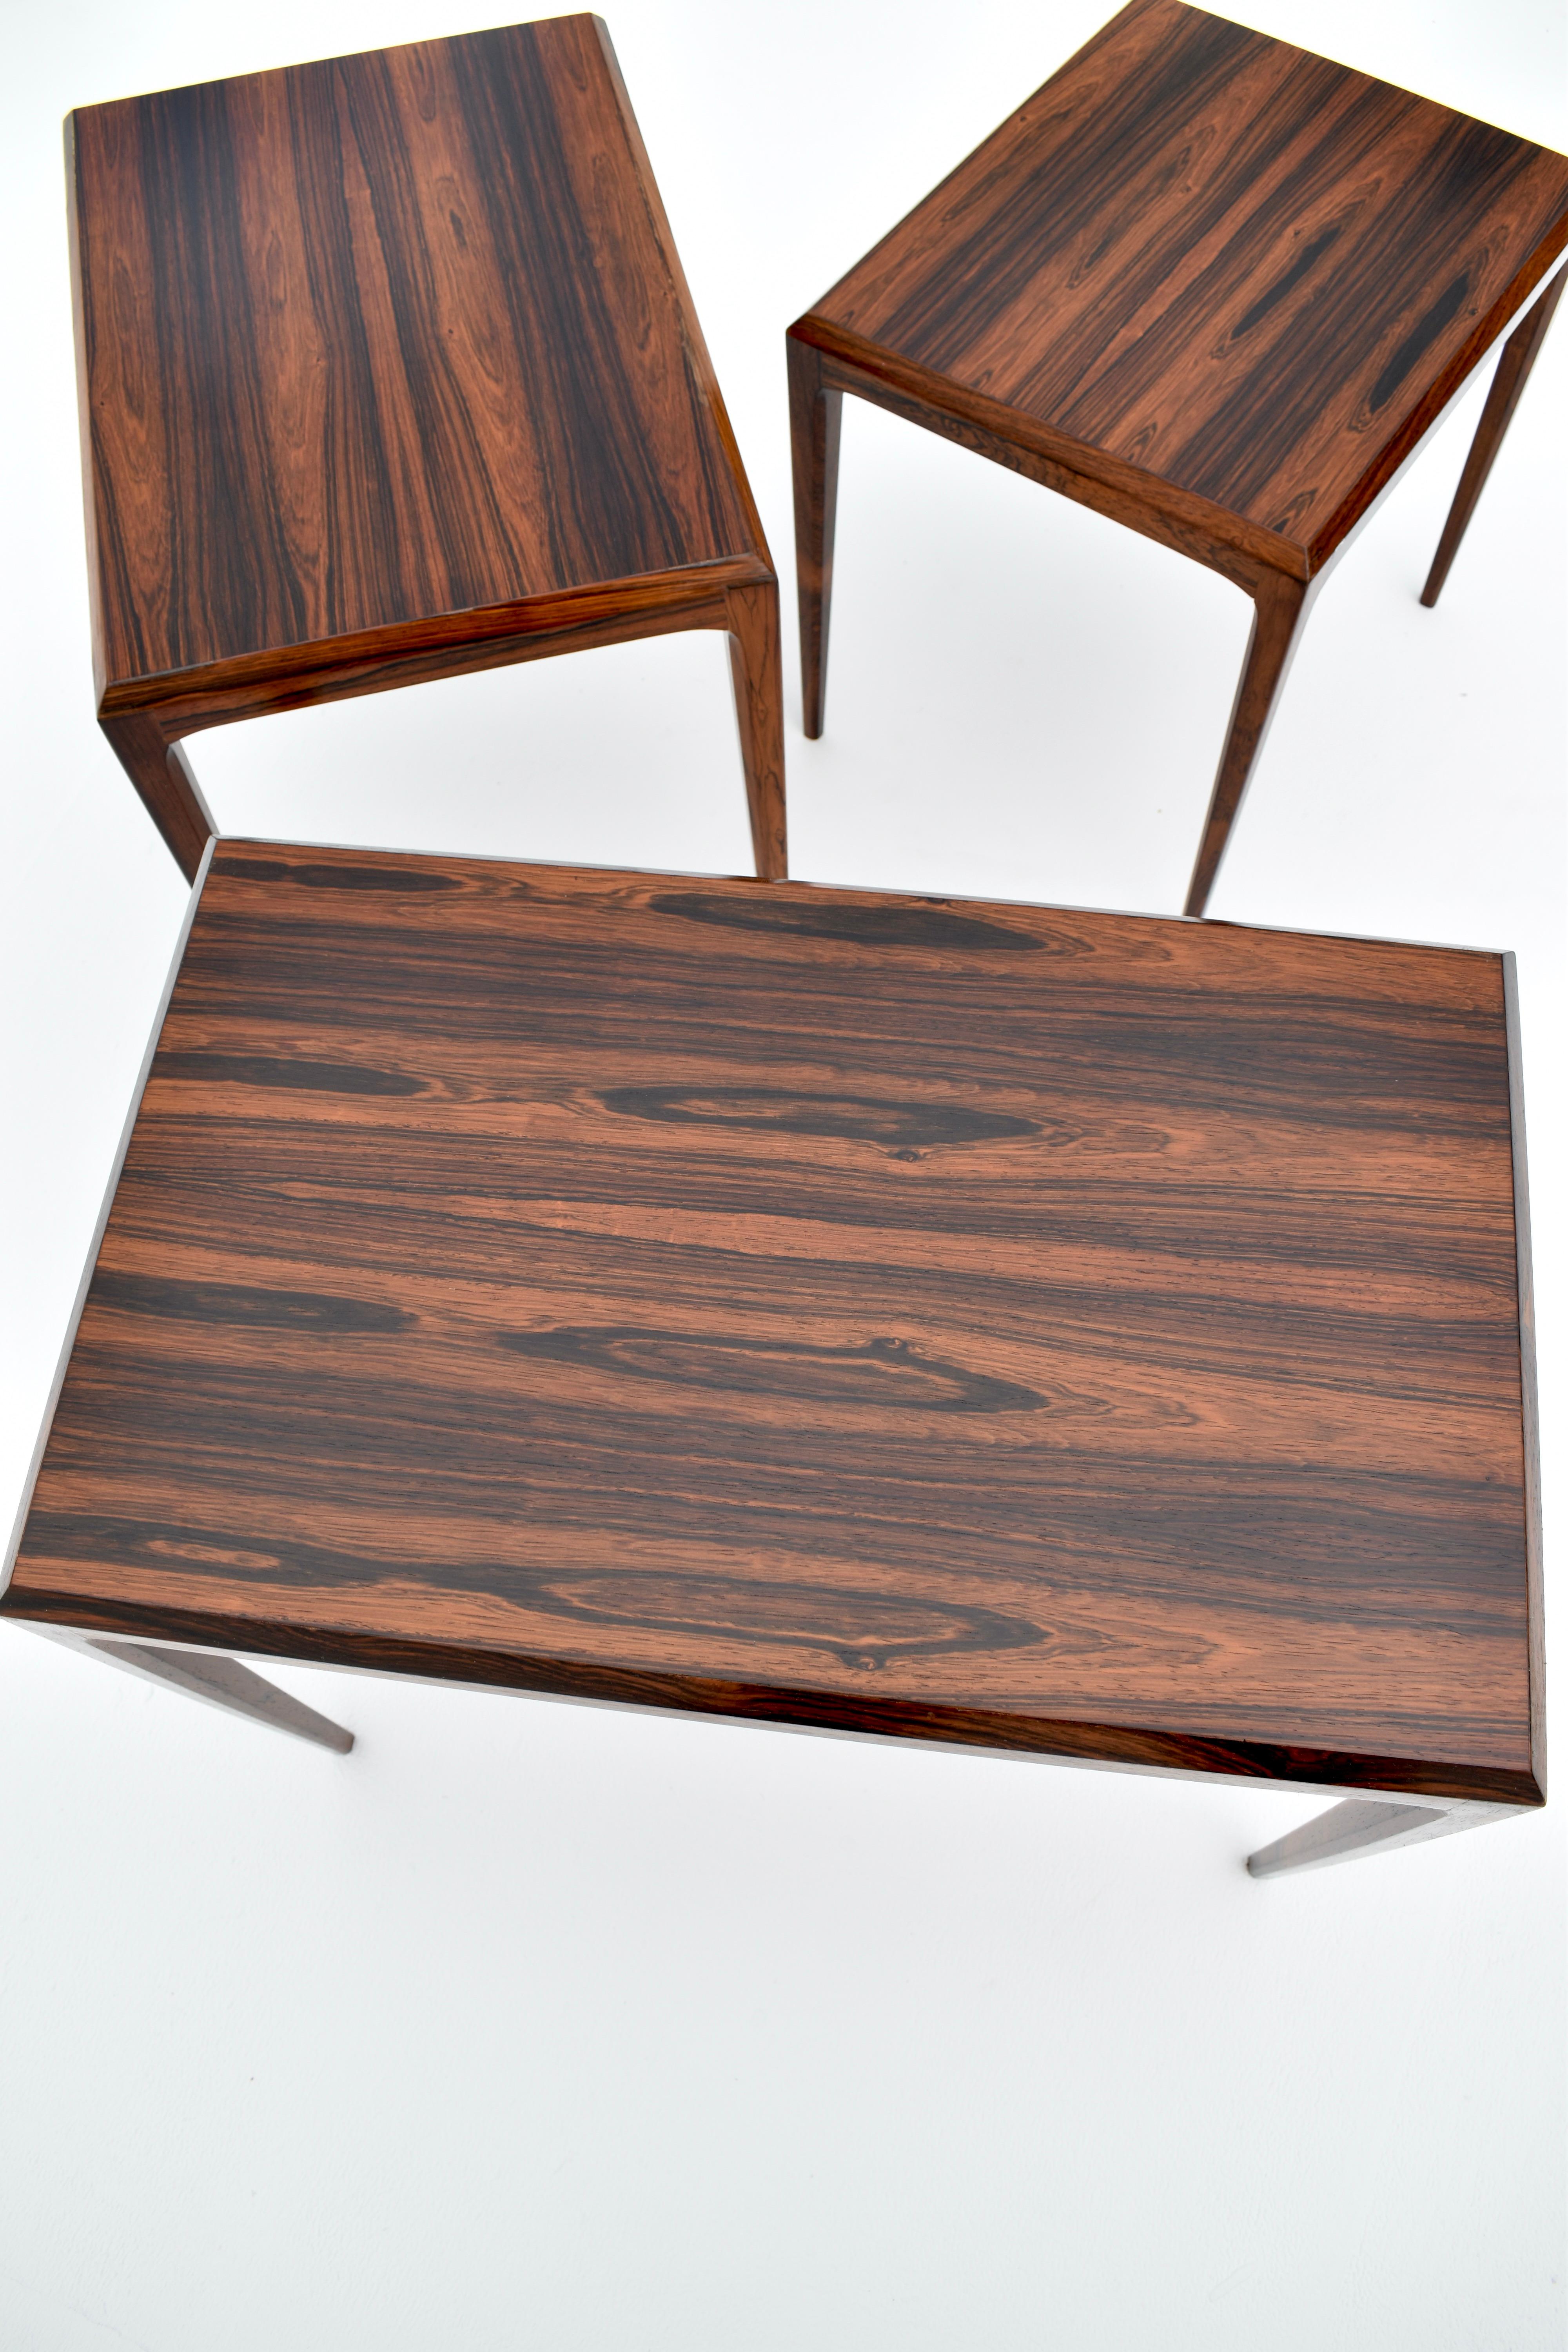 Midcentury Danish Set Of 3 Rosewood Nesting Tables BY Johannes Andersen For CFC For Sale 2